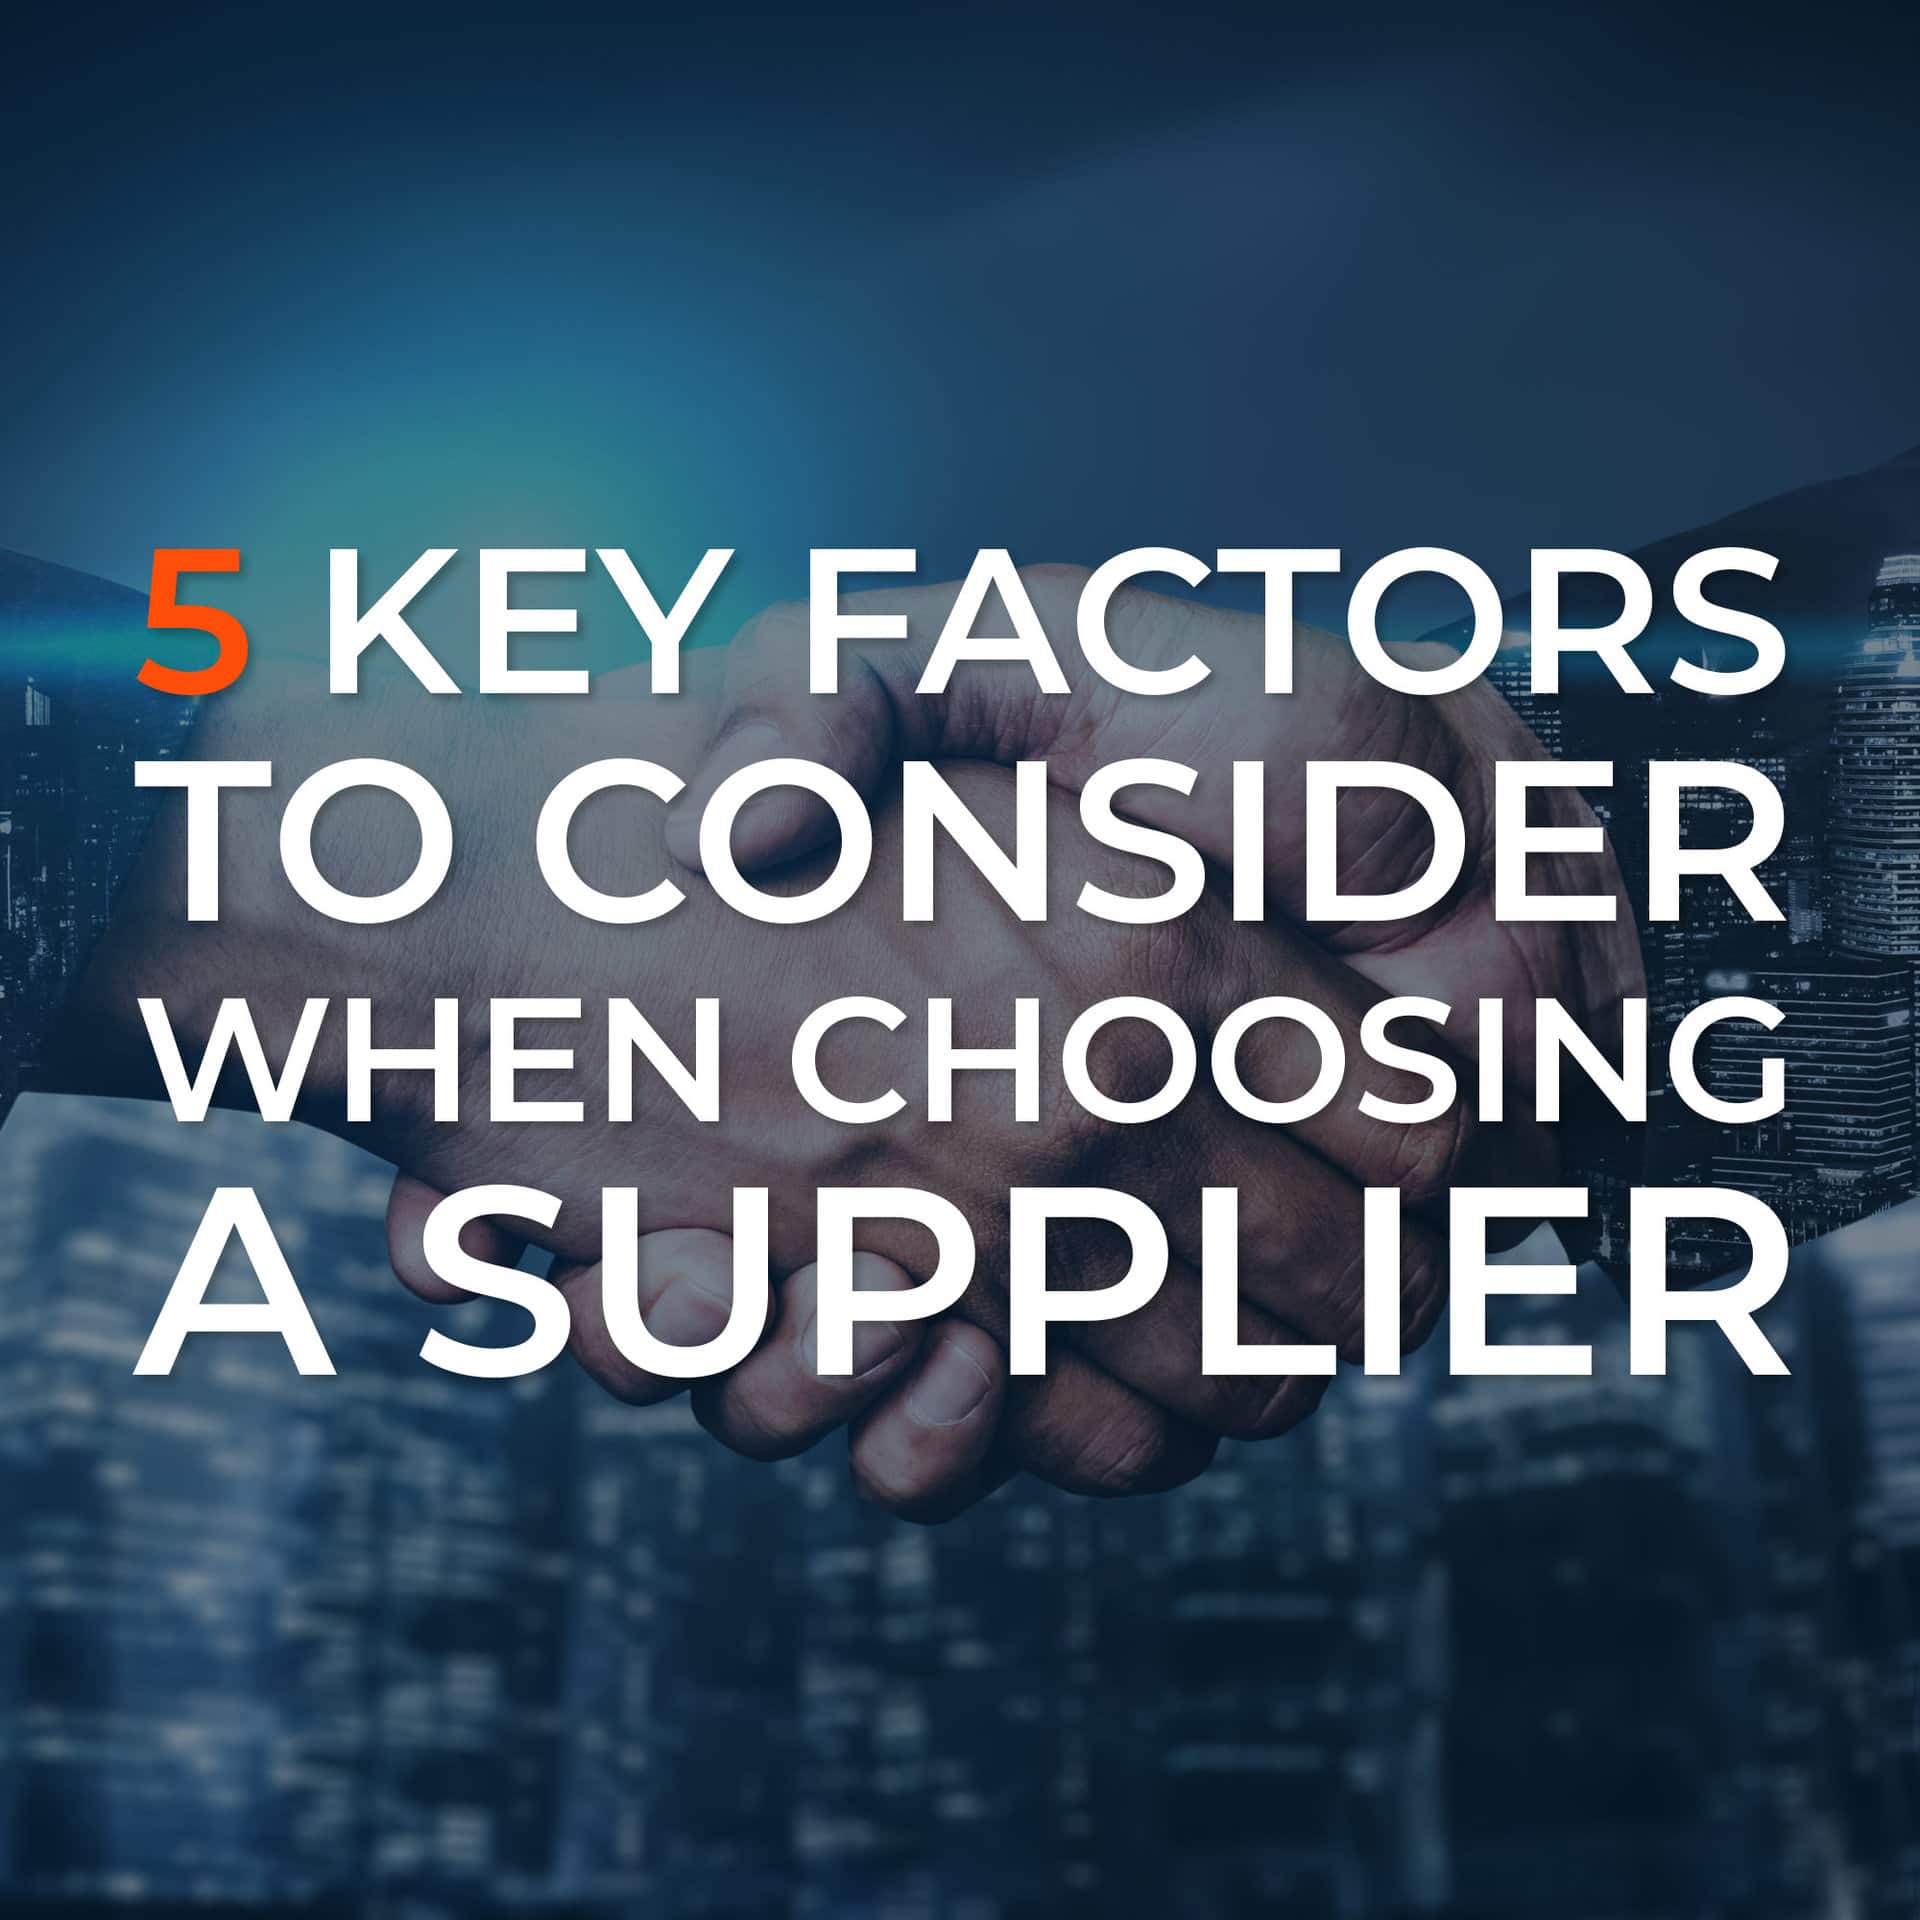 5 Key Factors to Consider When Choosing a Supplier